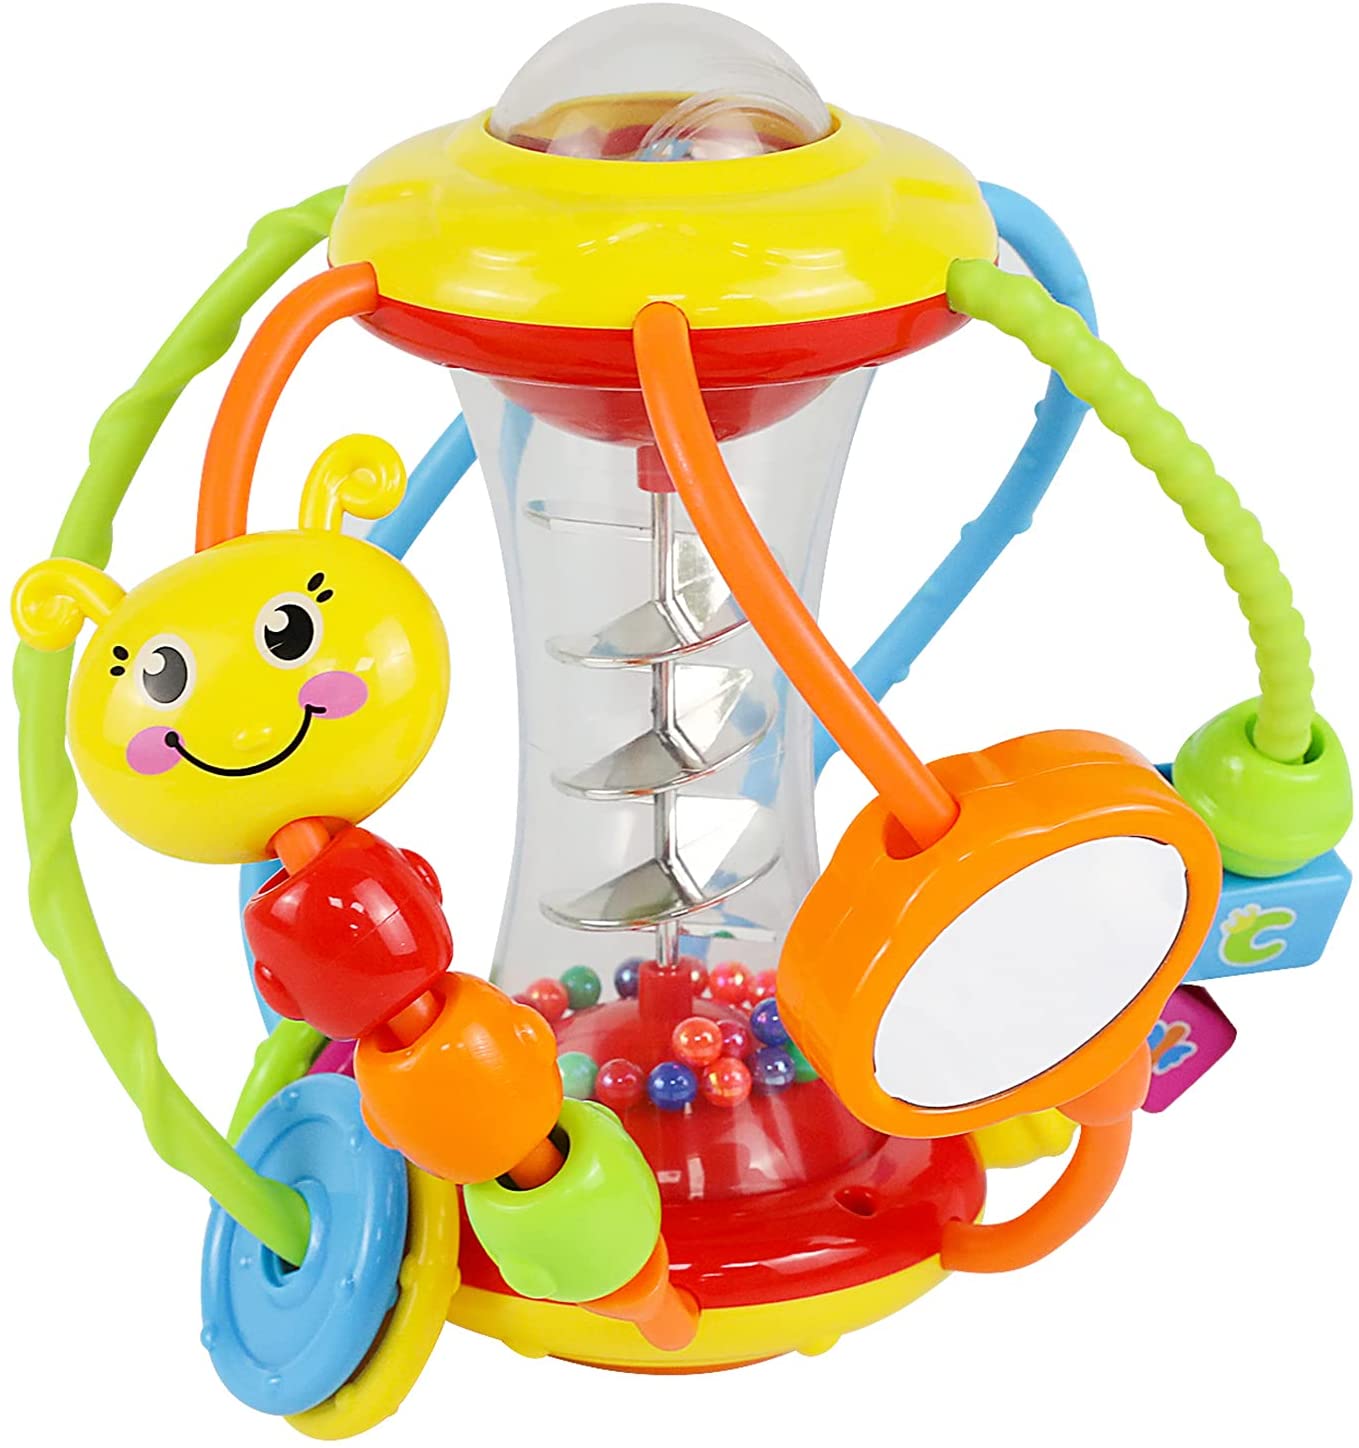 Early Education 6 Month Old Baby Toy Activity Rattles Ball Toy For Children & 